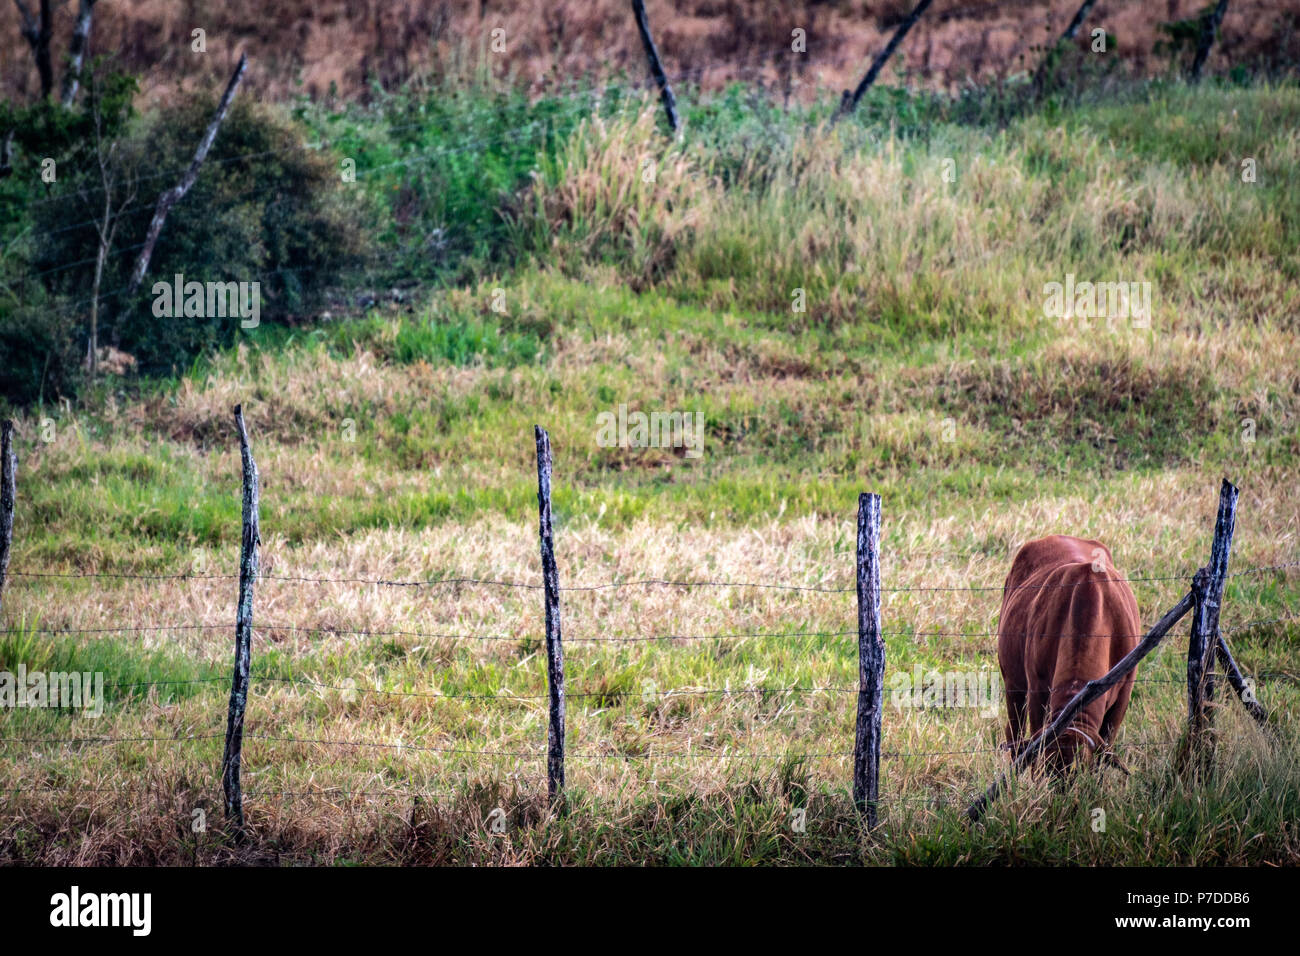 Single brown cow with head down, busy grazing on grass inside fenced farmland in rural Jamaica. Stock Photo